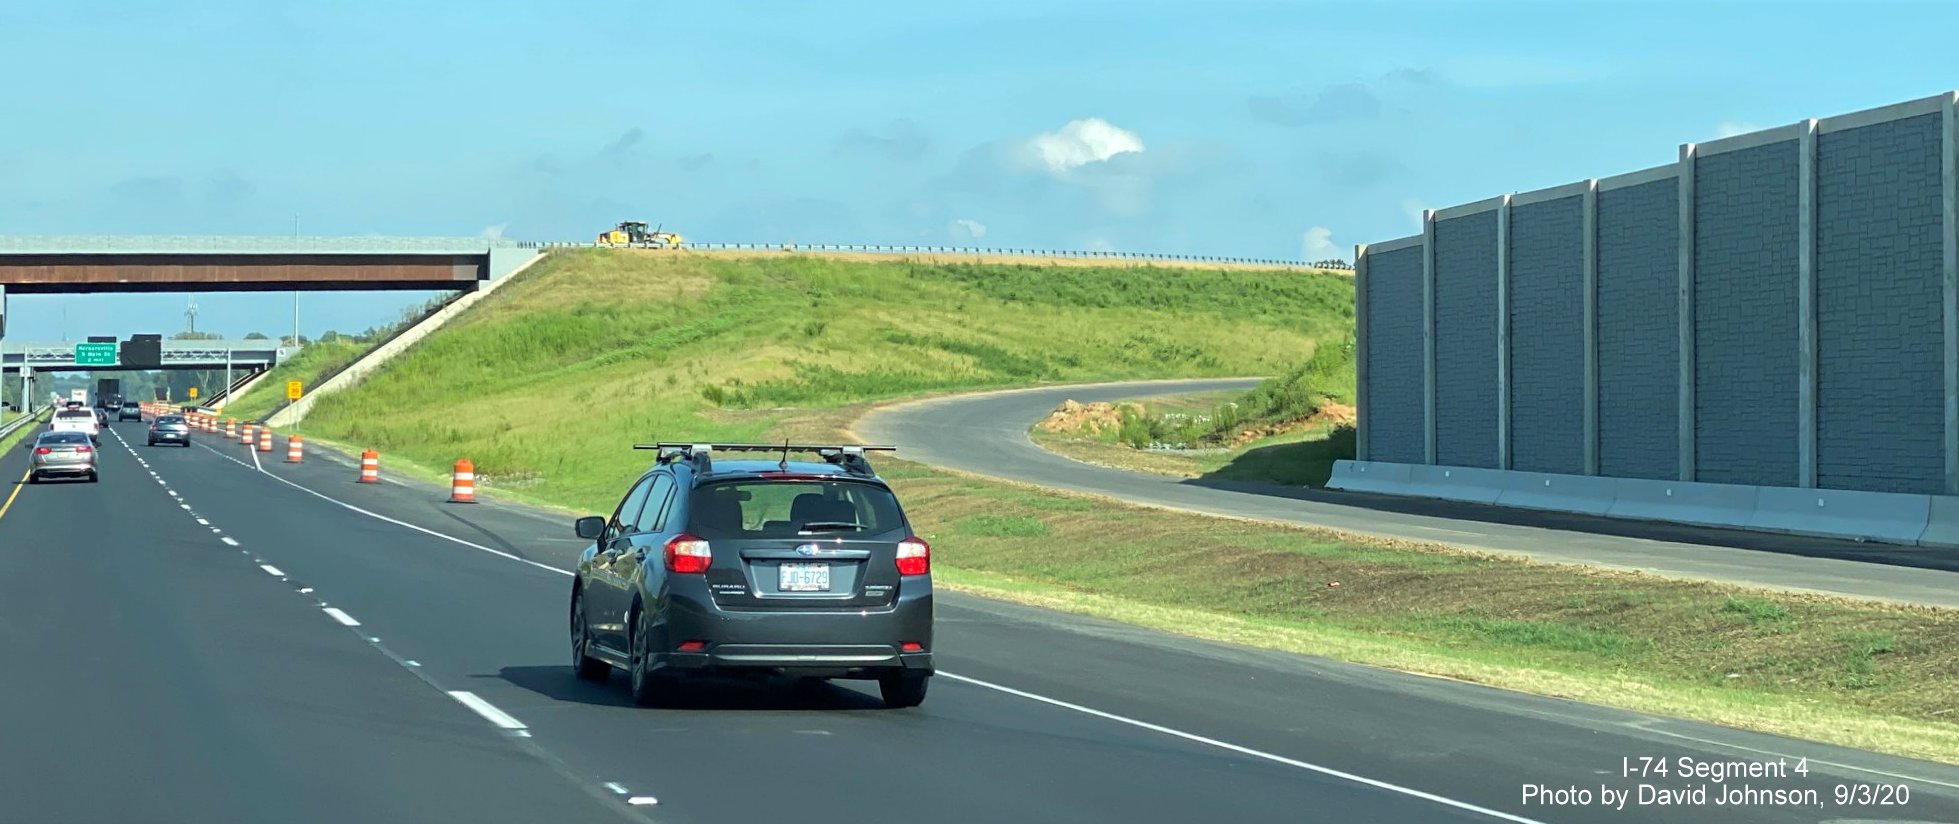 Image of noise wall along future ramp from US 421 South Salem Parkway to
      NC 74 West Winston Salem Northern Beltway, by David Johnson September 2020